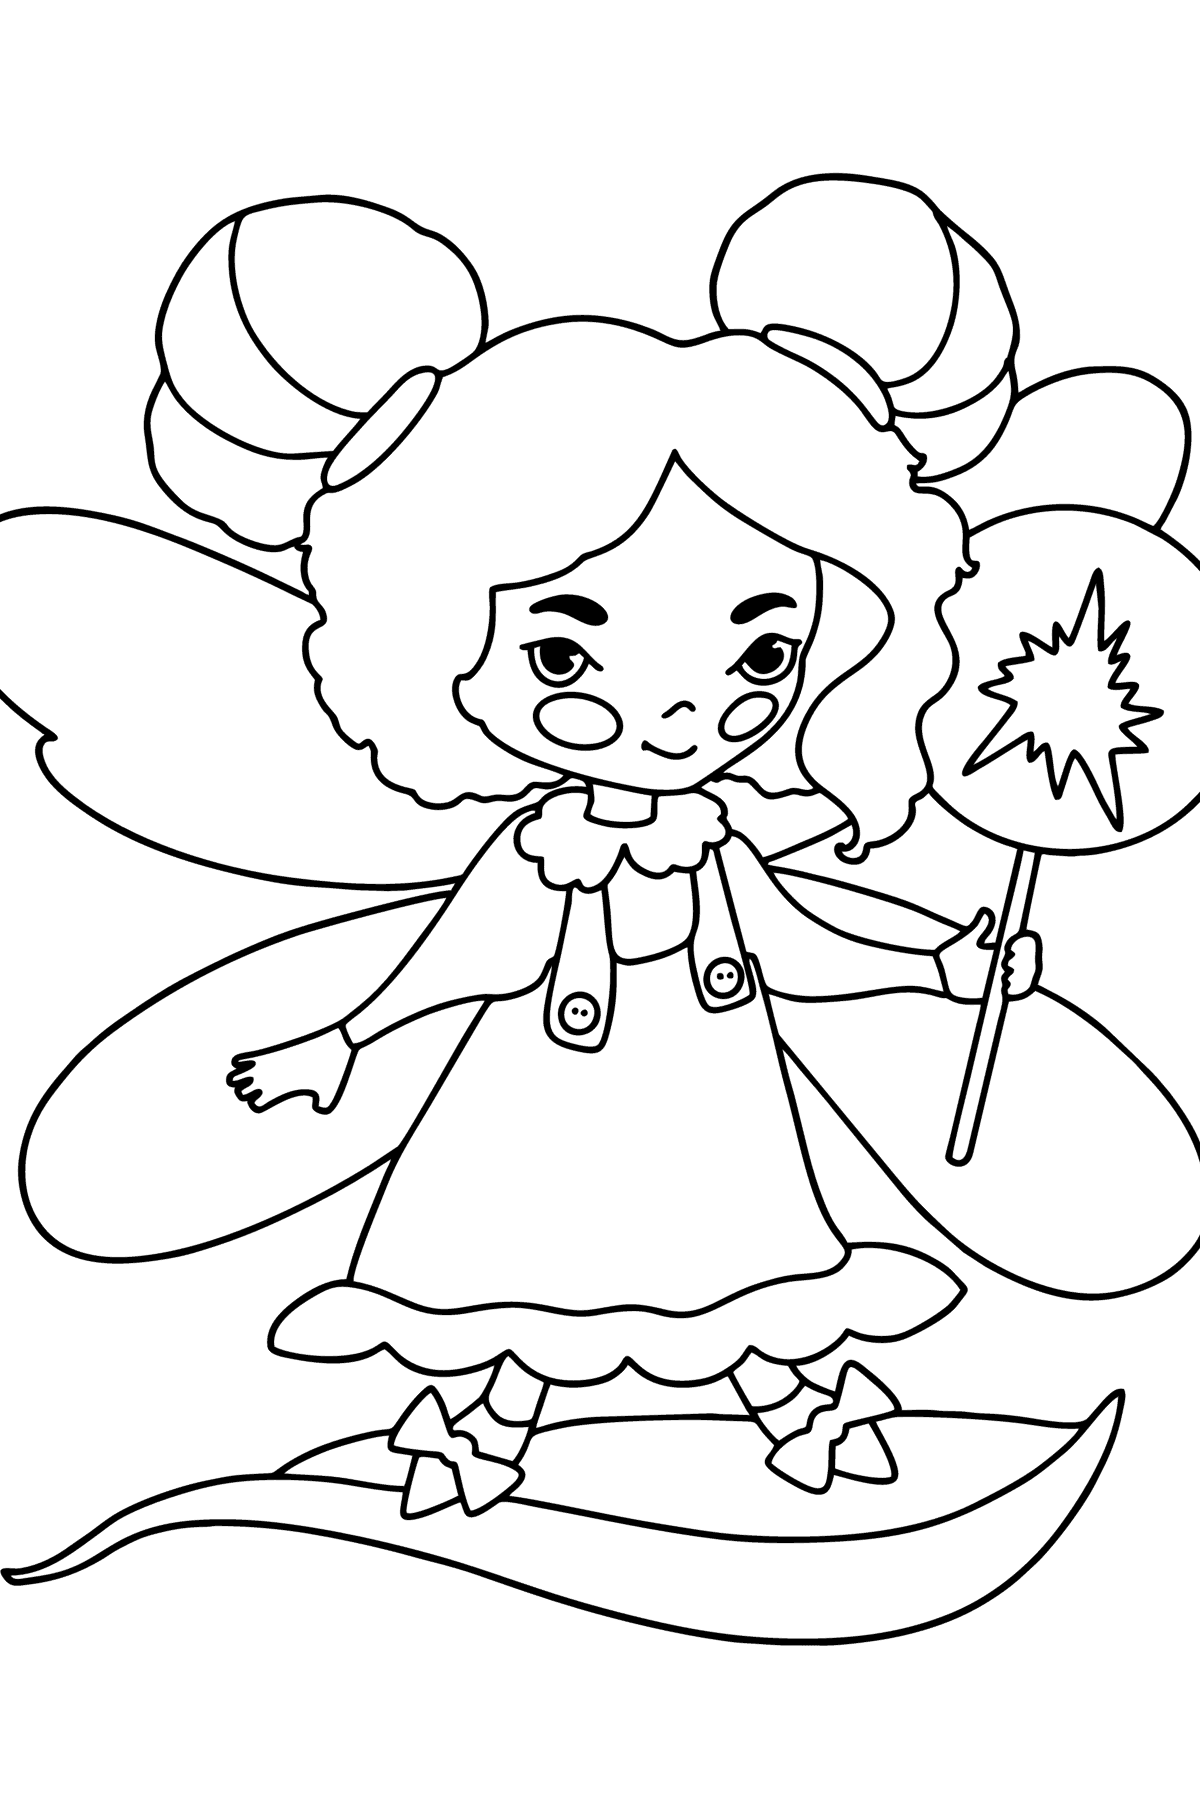 Fairy with a magic wand coloring page - Coloring Pages for Kids